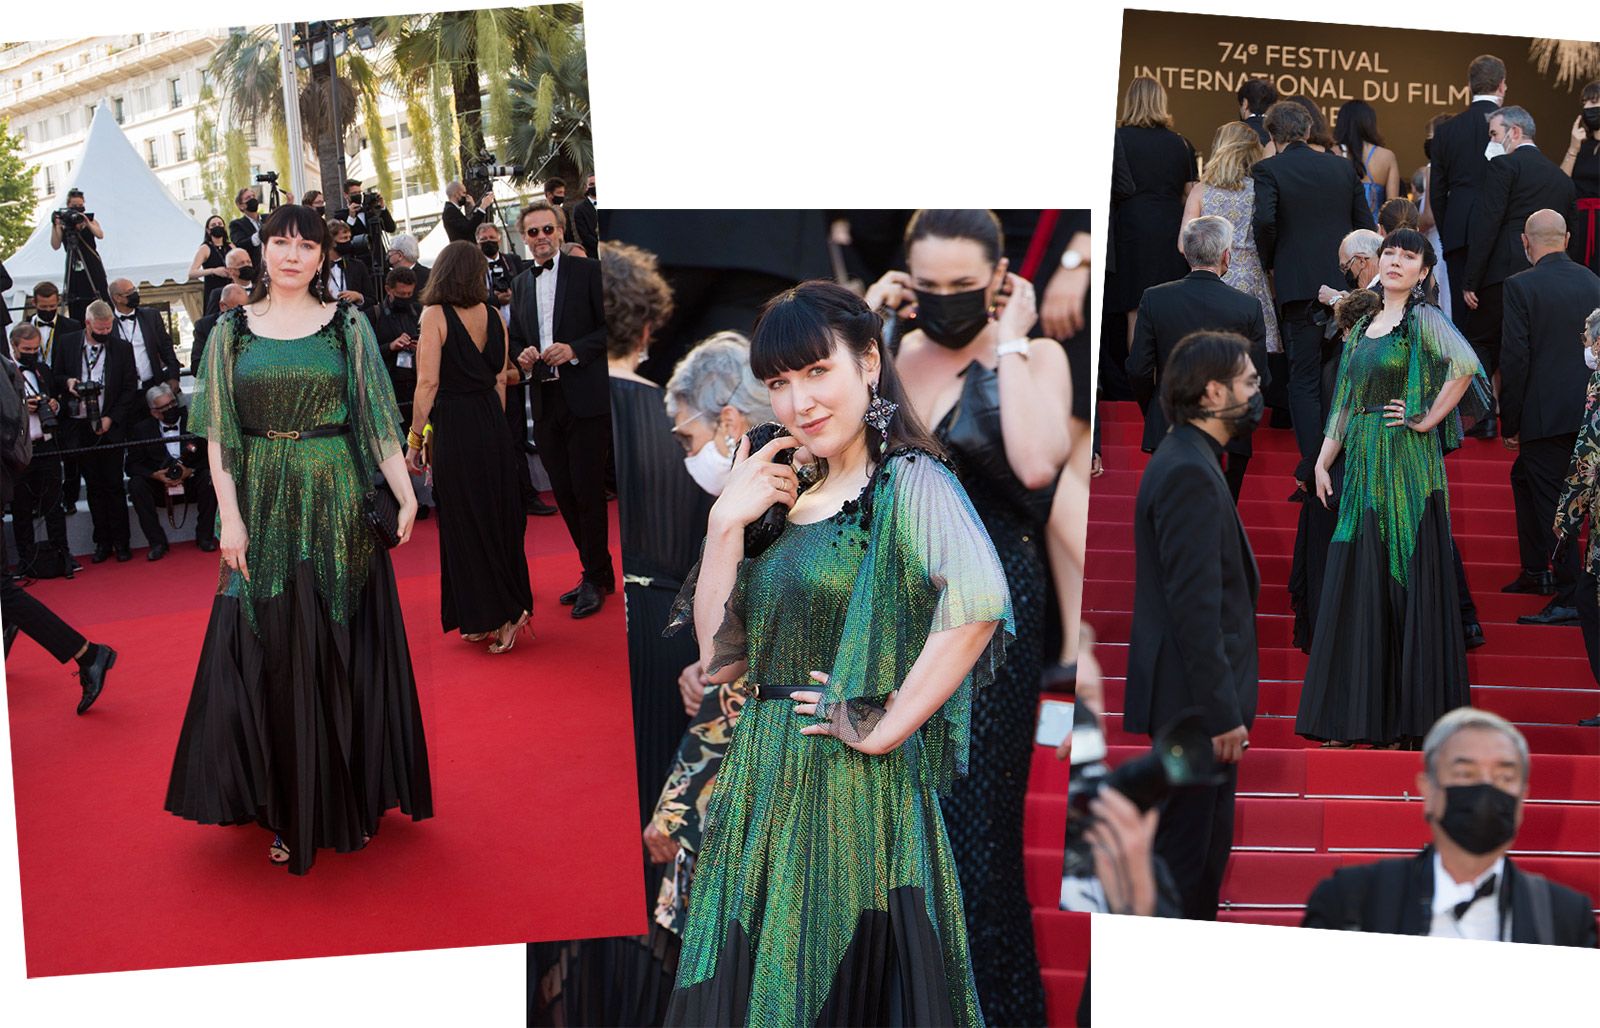 Katerina Perez at the Cannes Film Festival 2021 wearing a Gemy Maalouf gown, Alzuarr shoes and Lydia Courteille earrings from the Topkapi collection